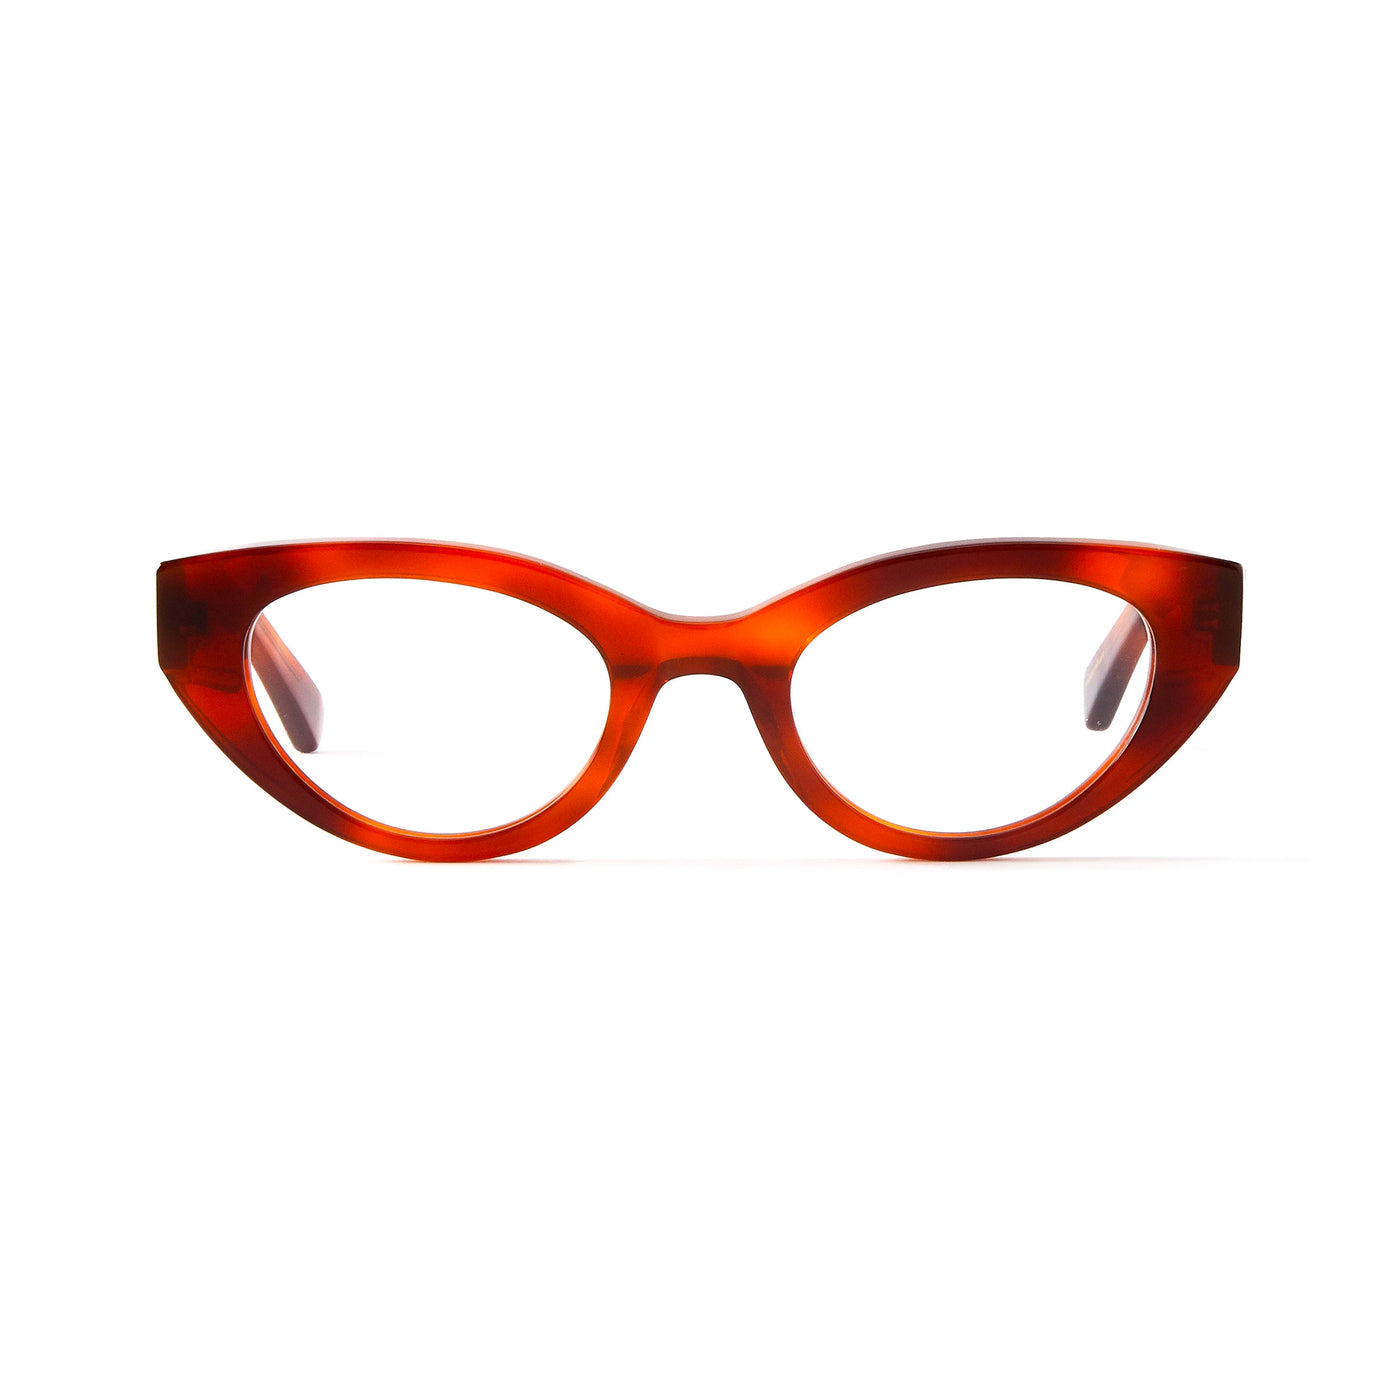 Camille Cognac Reading Glasses – FRENCH KIWIS